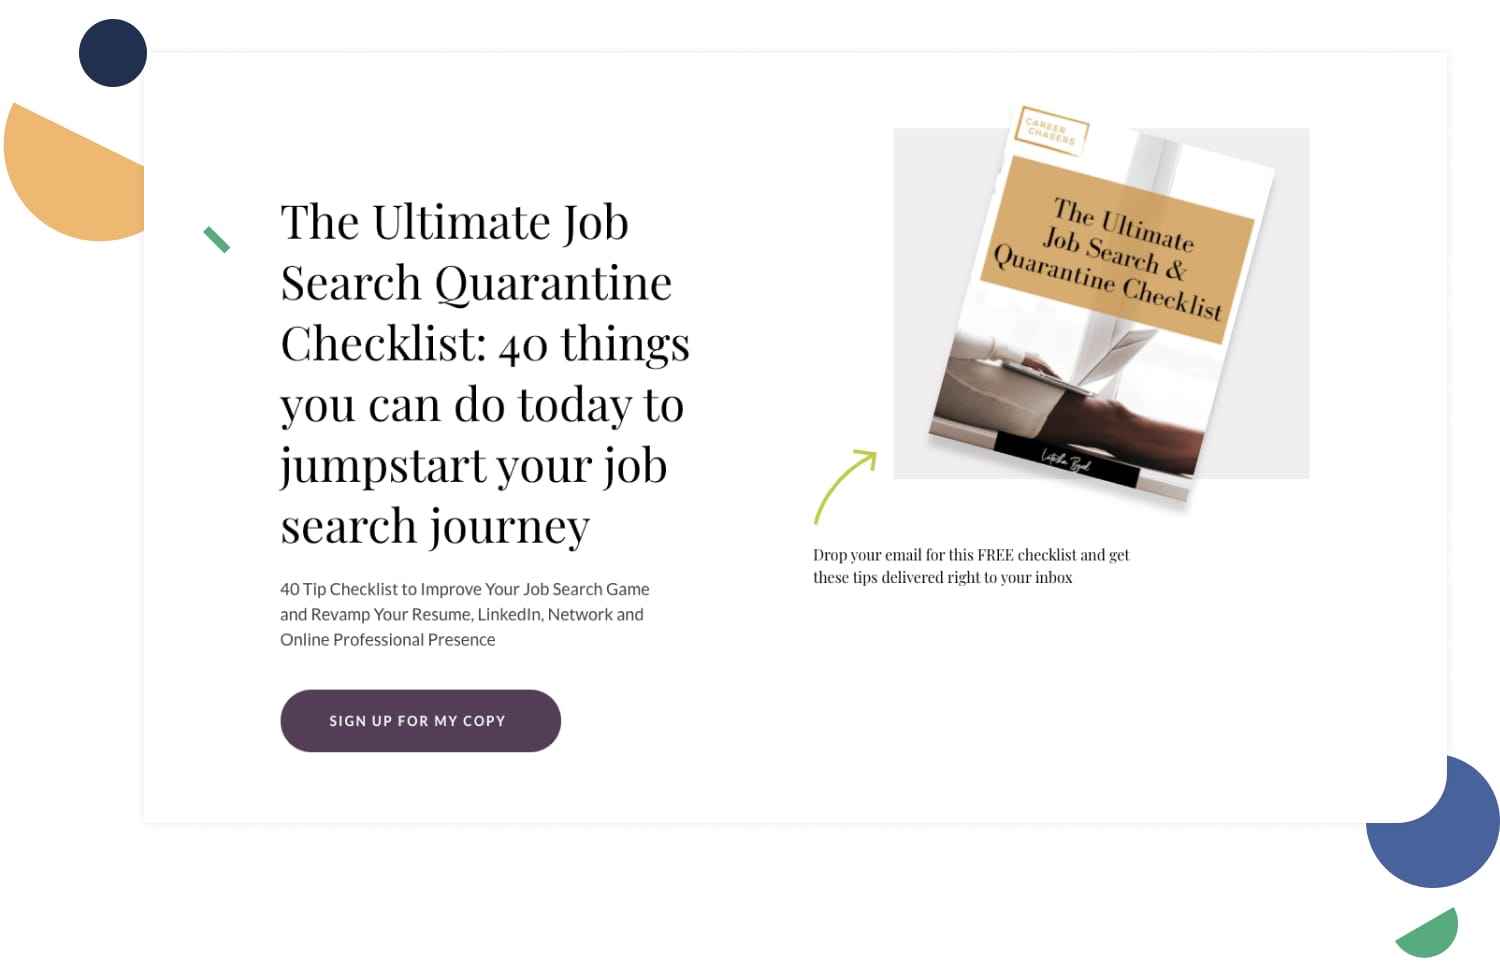 Career coach Latesha Byrd incentivizes new email signups with an Ultimate Job Search Quarantine Checklist.